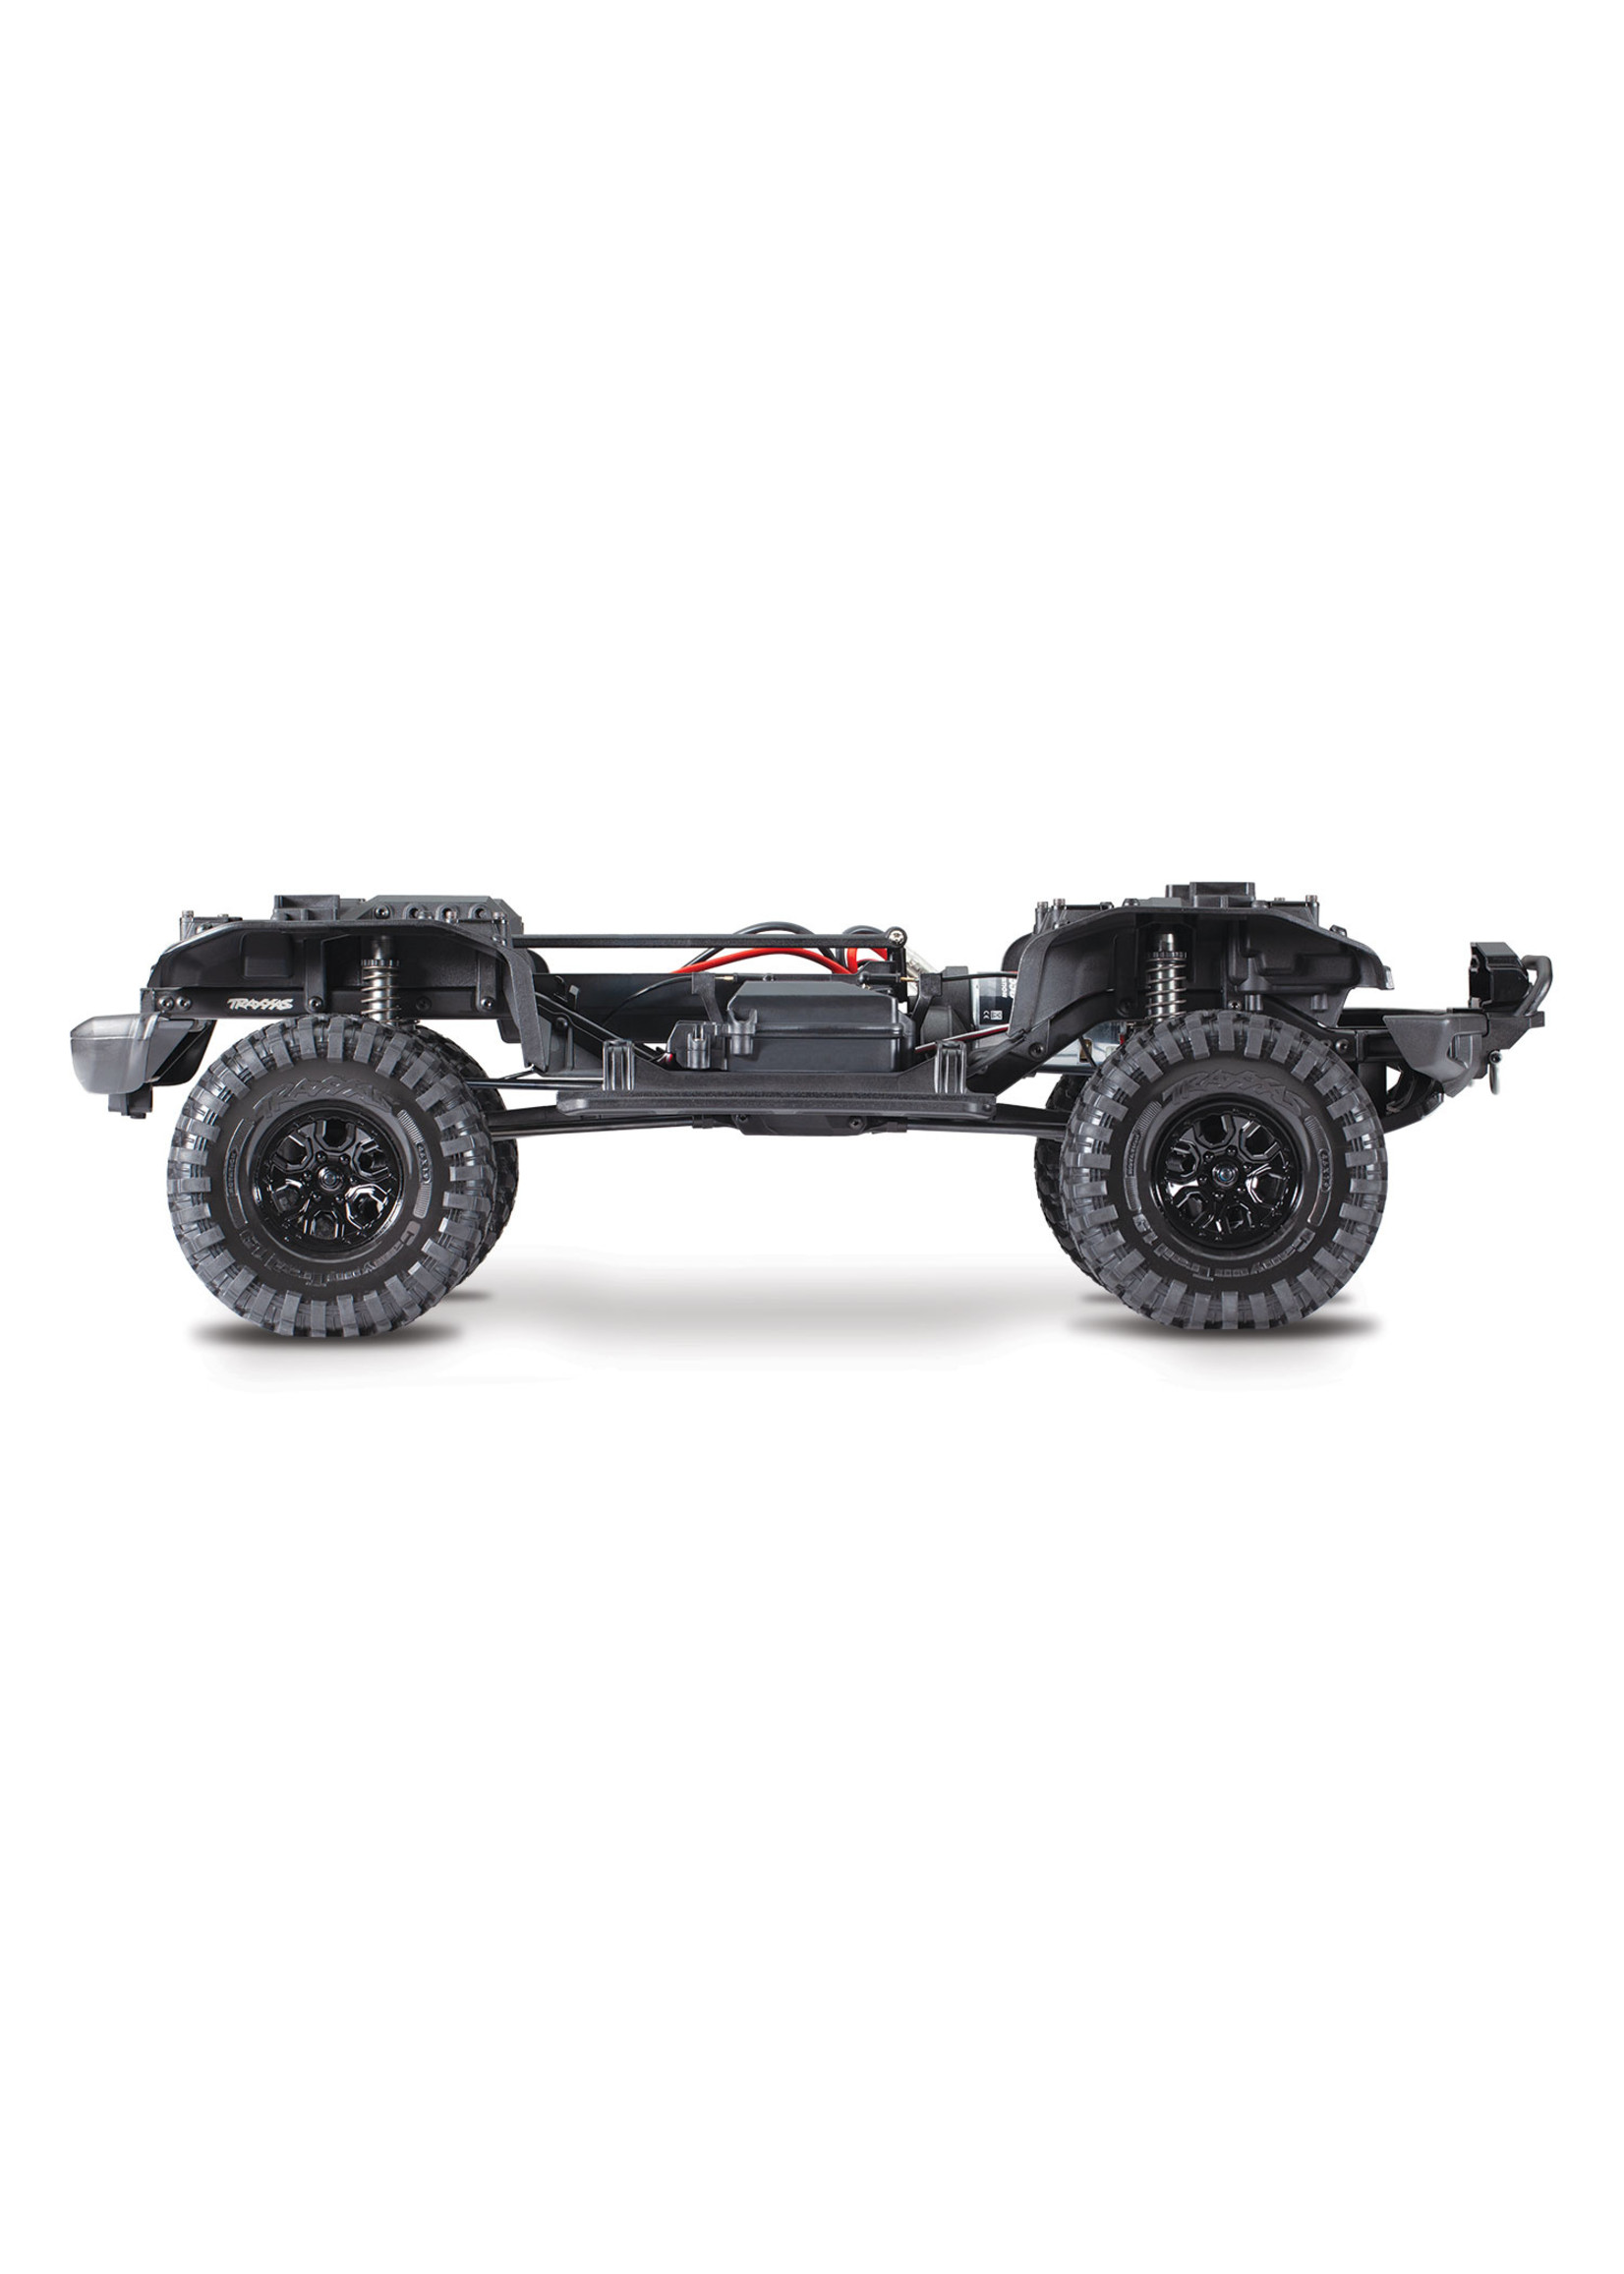 Traxxas 1/10 TRX-4 2021 Bronco Scale and Trail Crawler RTR - Iconic Silver